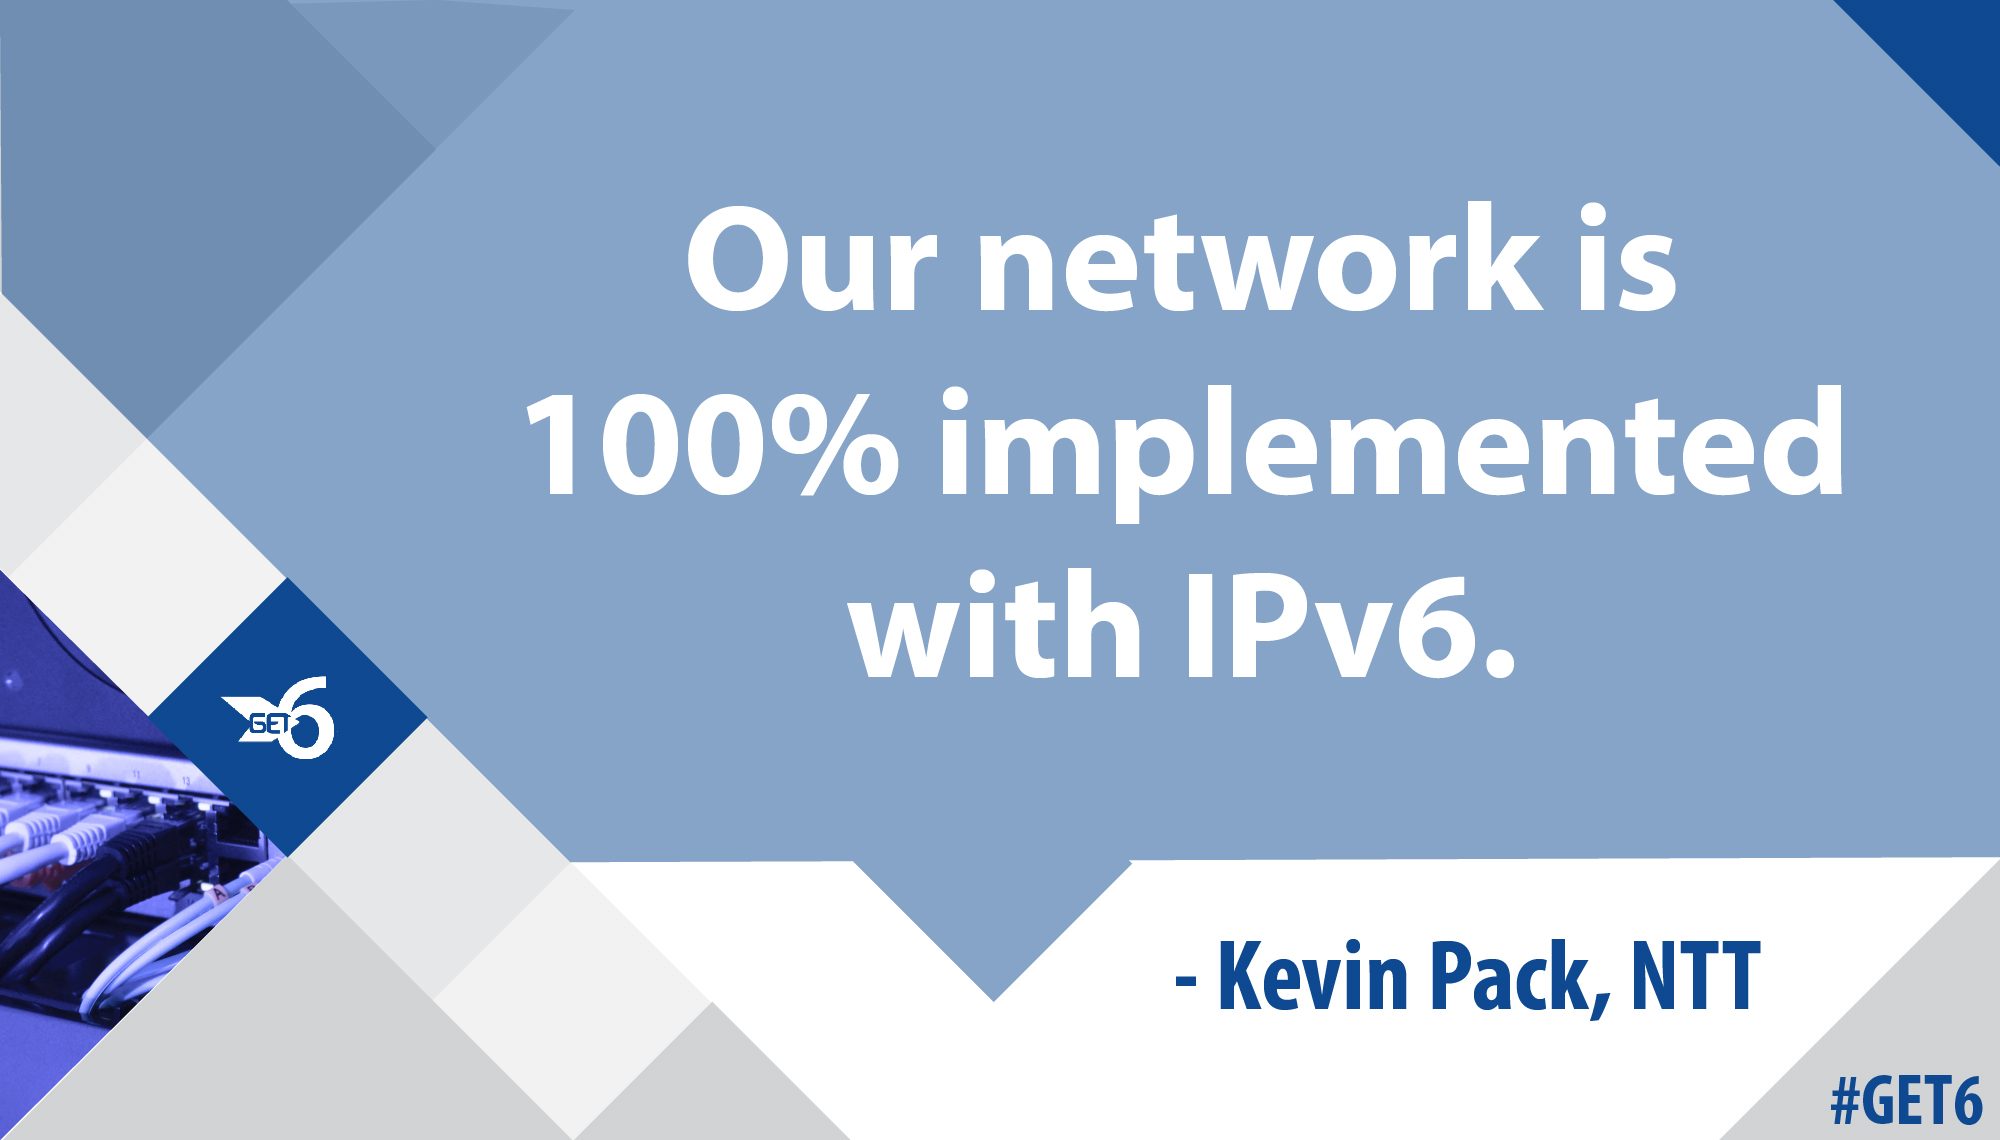 “Our network is 100% implemented with IPv6.